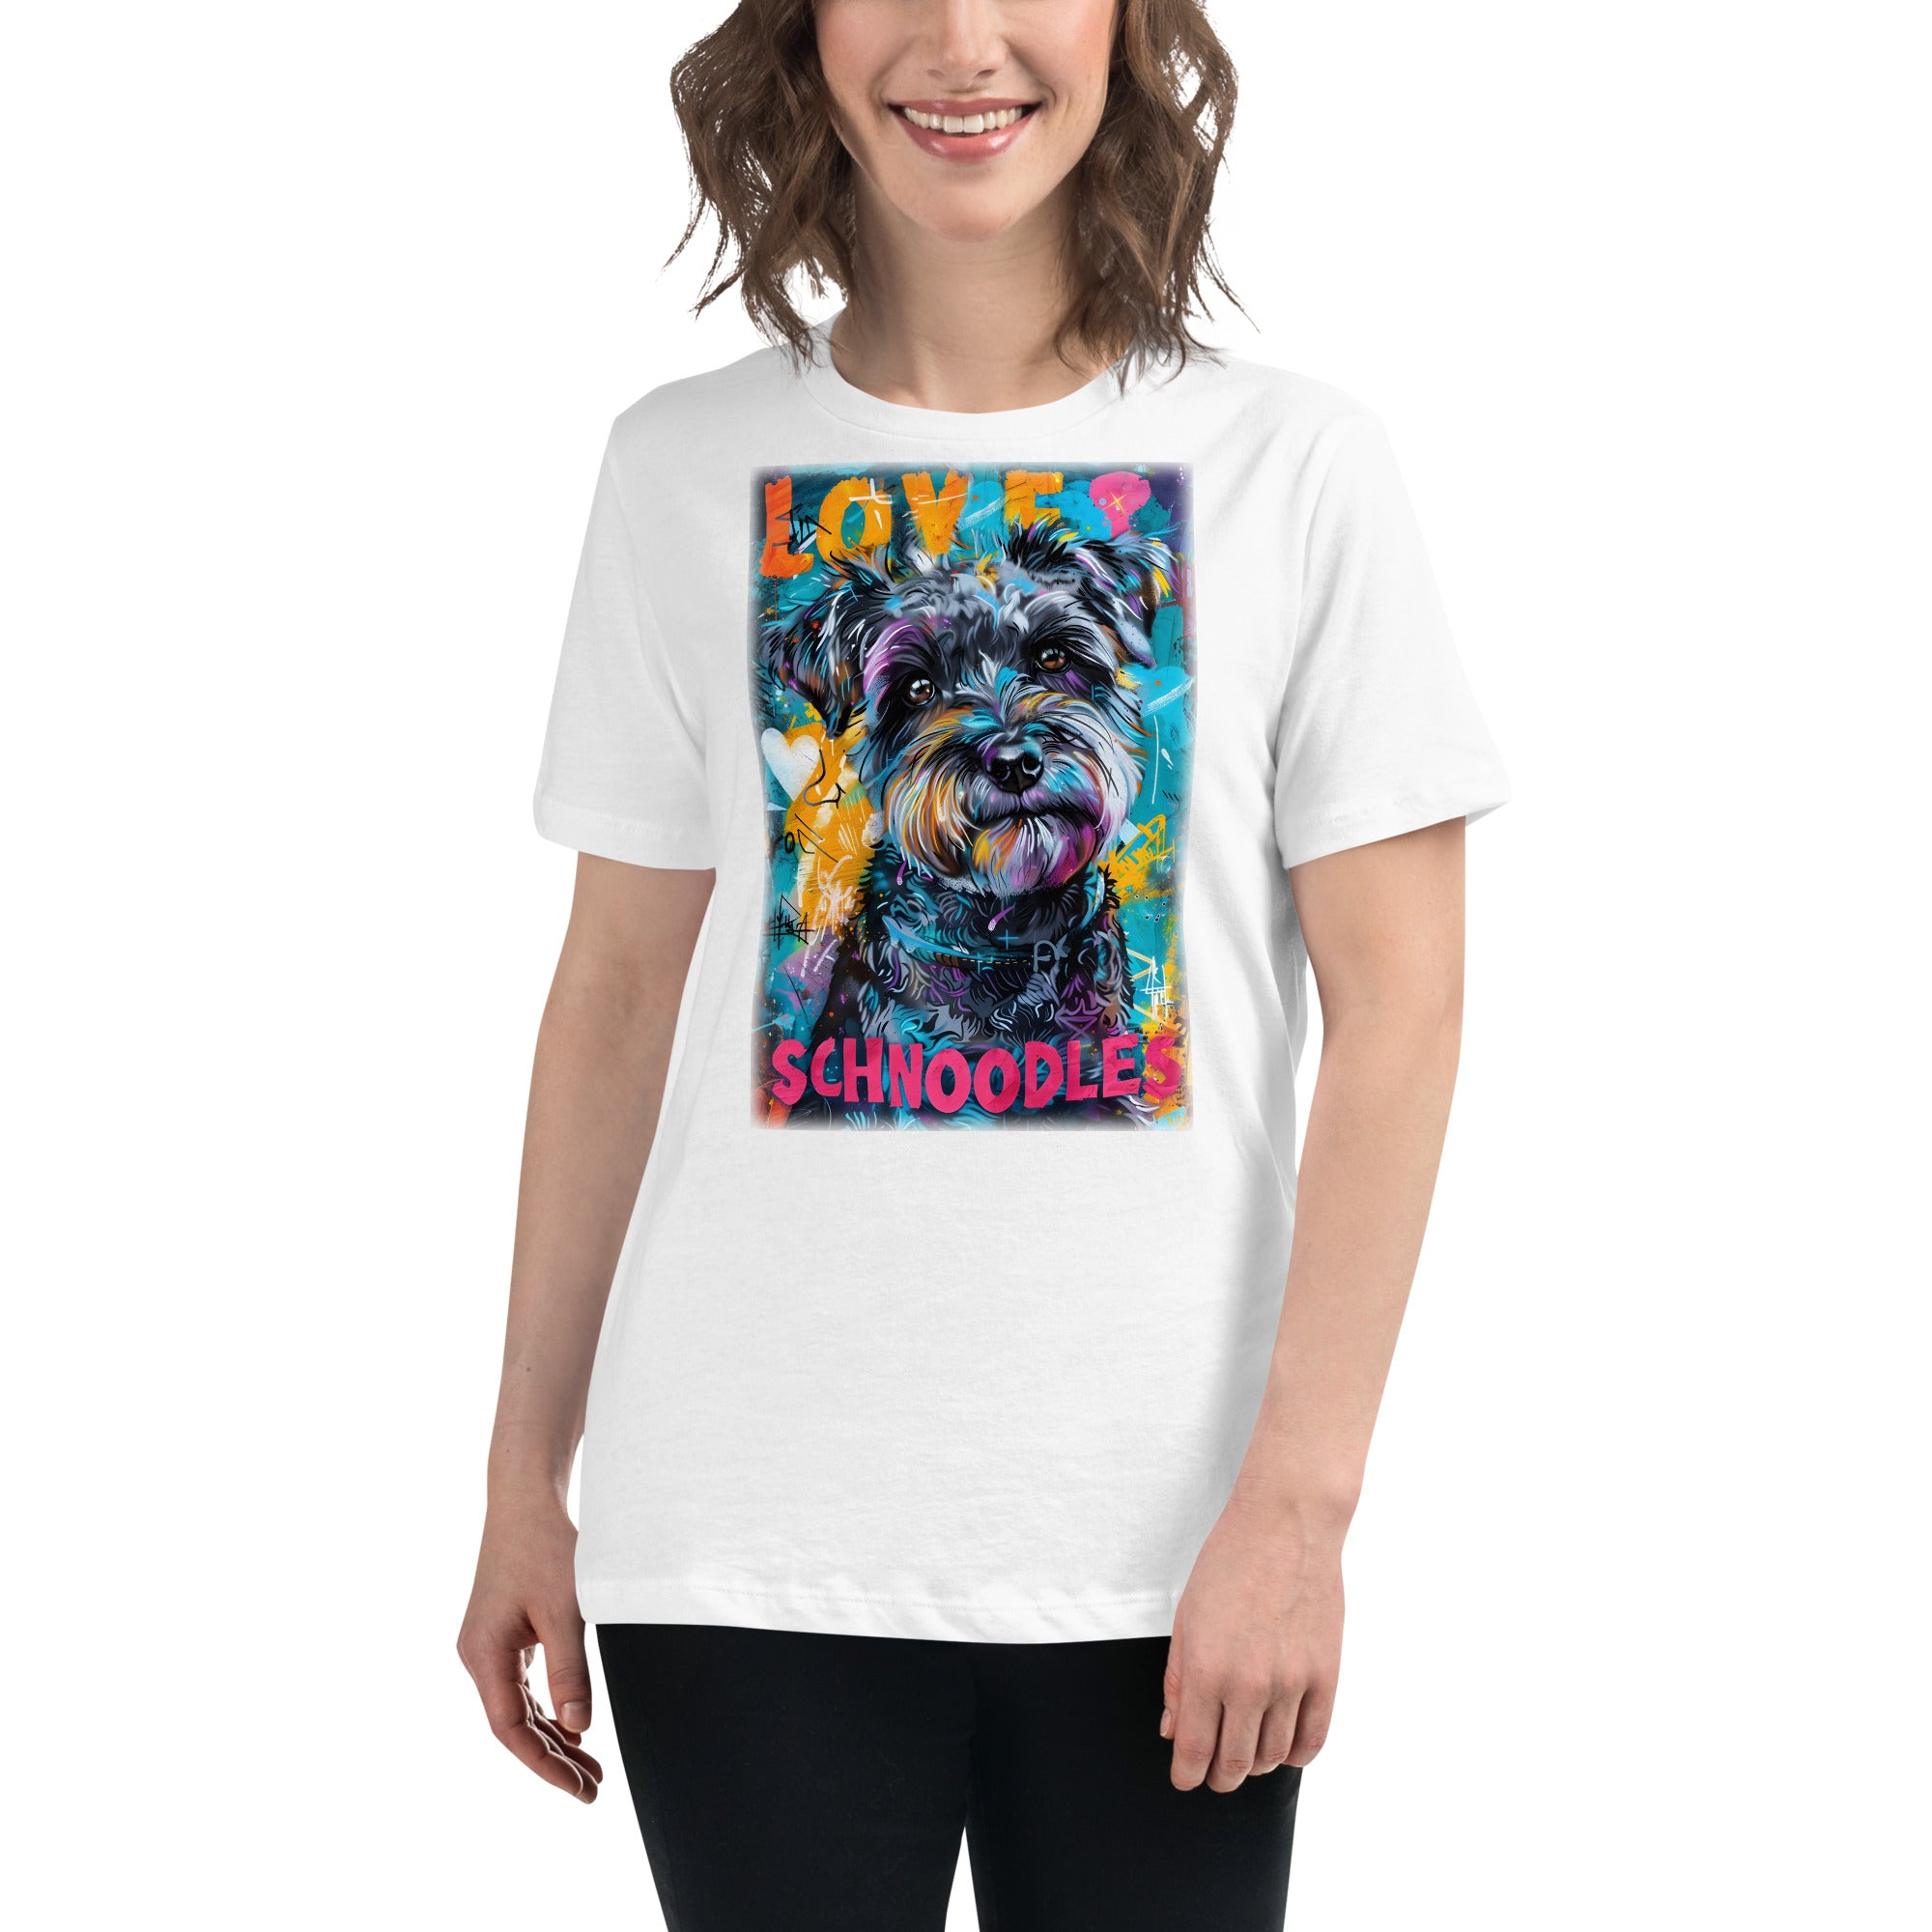 Schnoodle Women's Relaxed T-Shirt